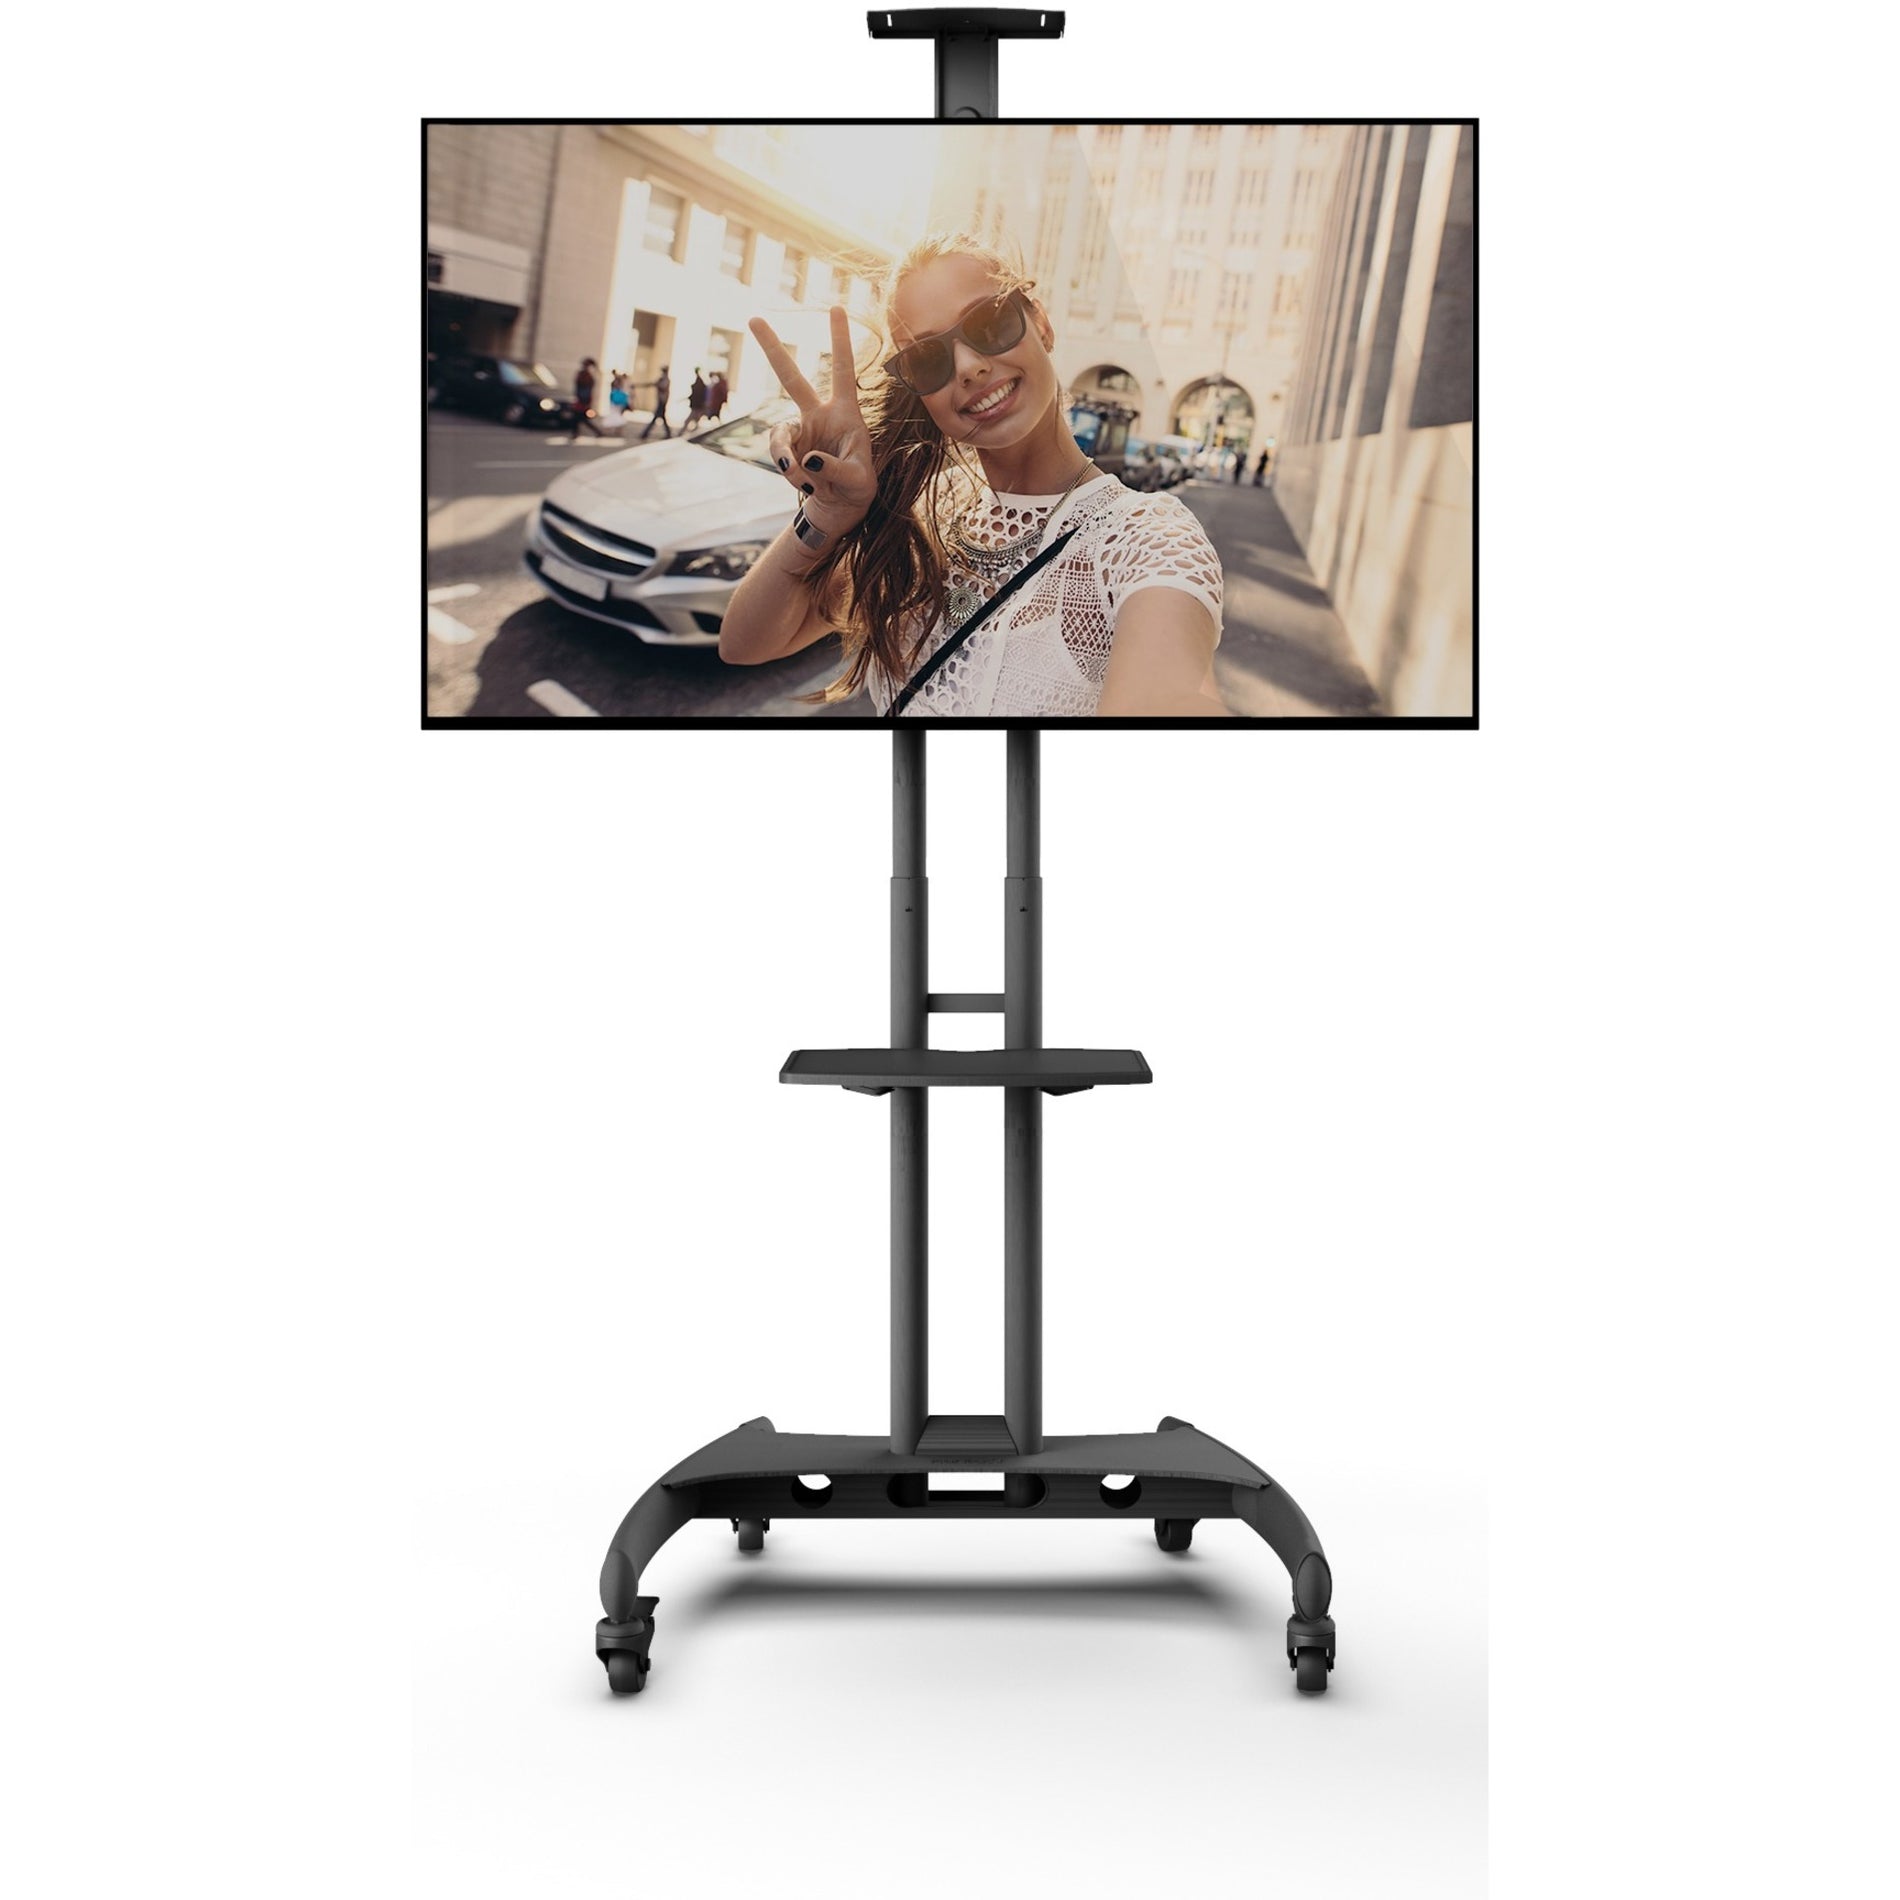 Kanto MTM65PL Mobile TV Mount with Adjustable Shelf for 37-65" TVs, Durable and Portable